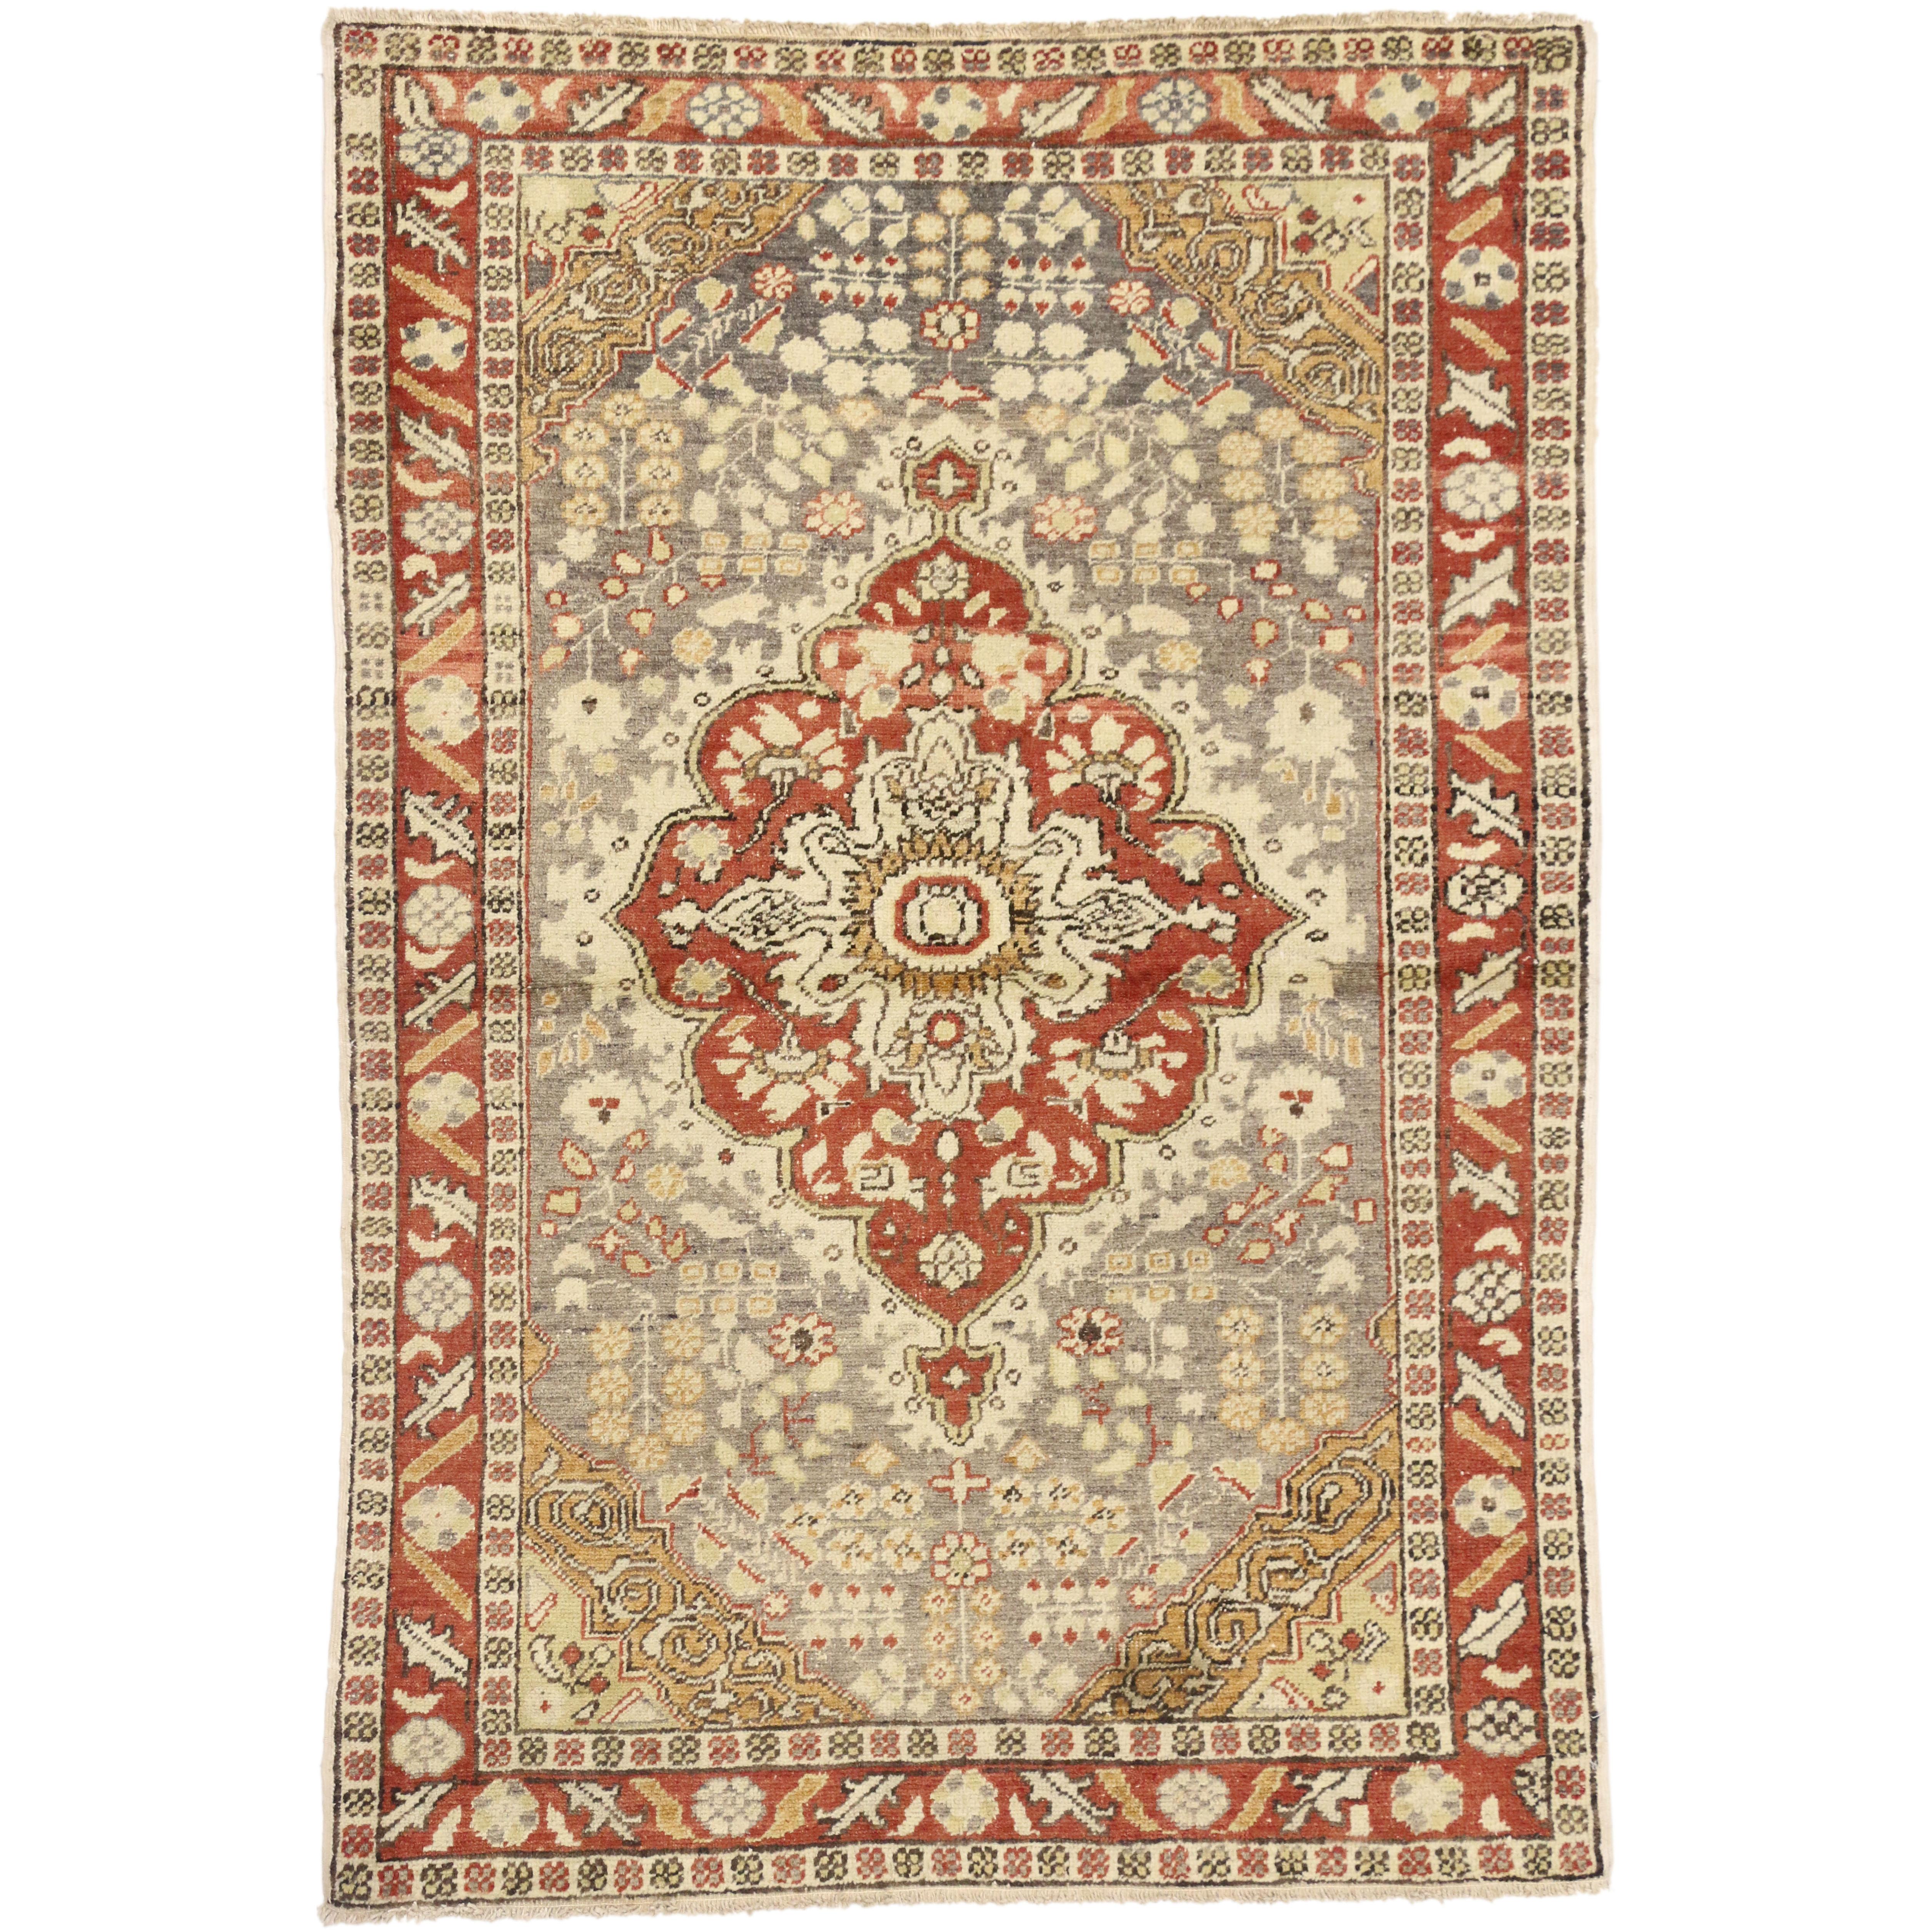 Modern Rustic Style Vintage Turkish Sivas Accent Rug, Entry or Foyer Rug